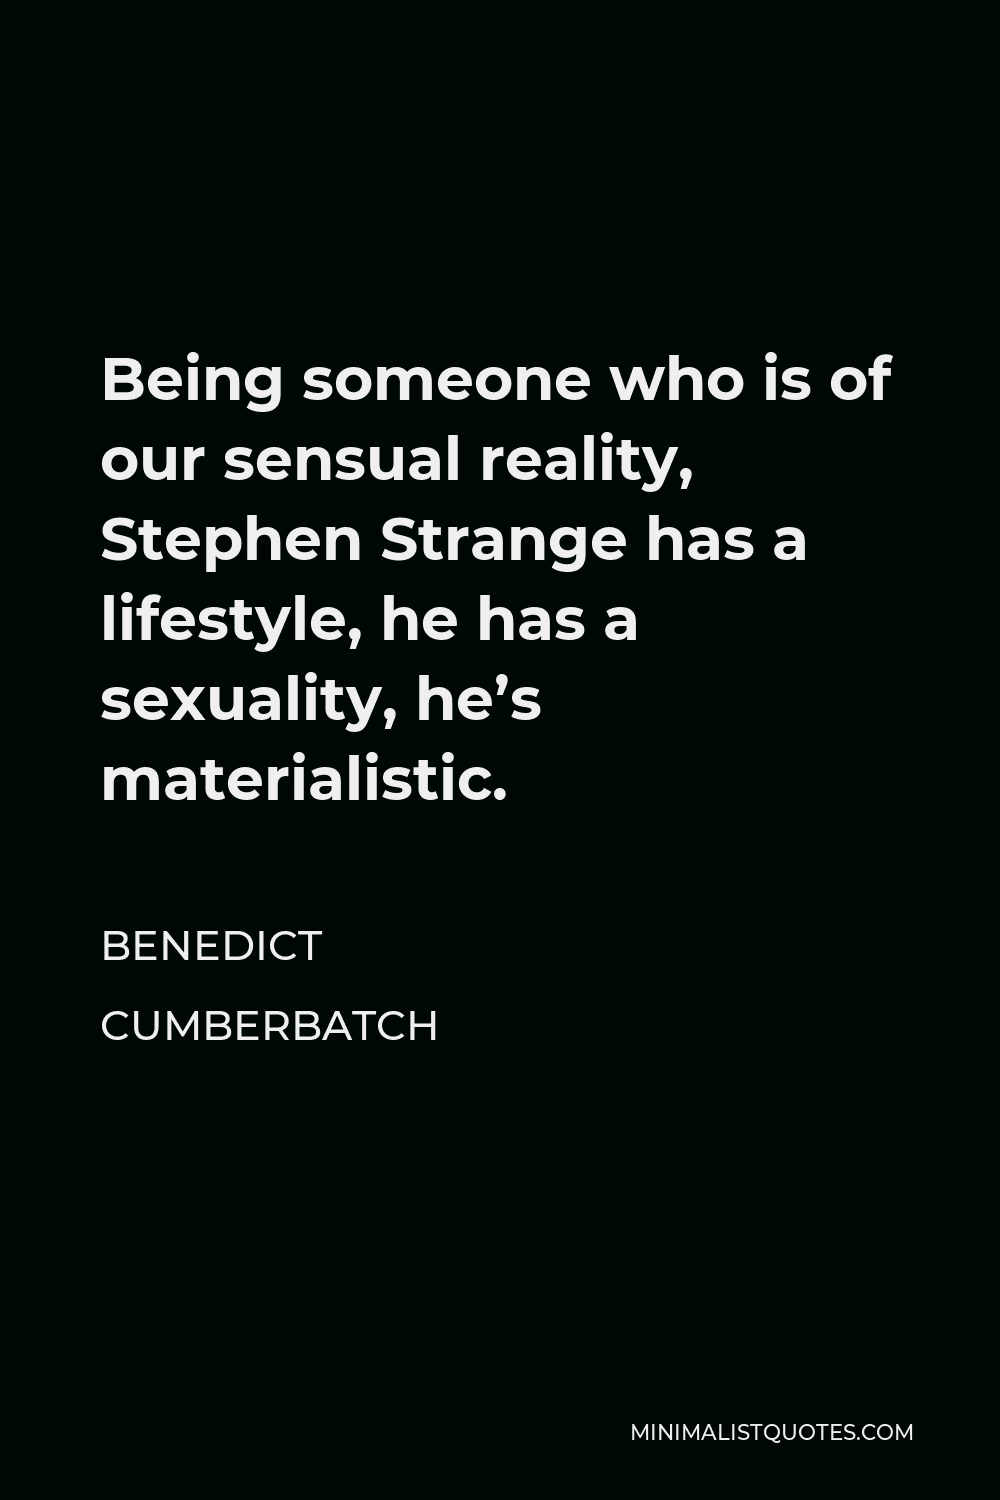 Benedict Cumberbatch Quote - Being someone who is of our sensual reality, Stephen Strange has a lifestyle, he has a sexuality, he’s materialistic.